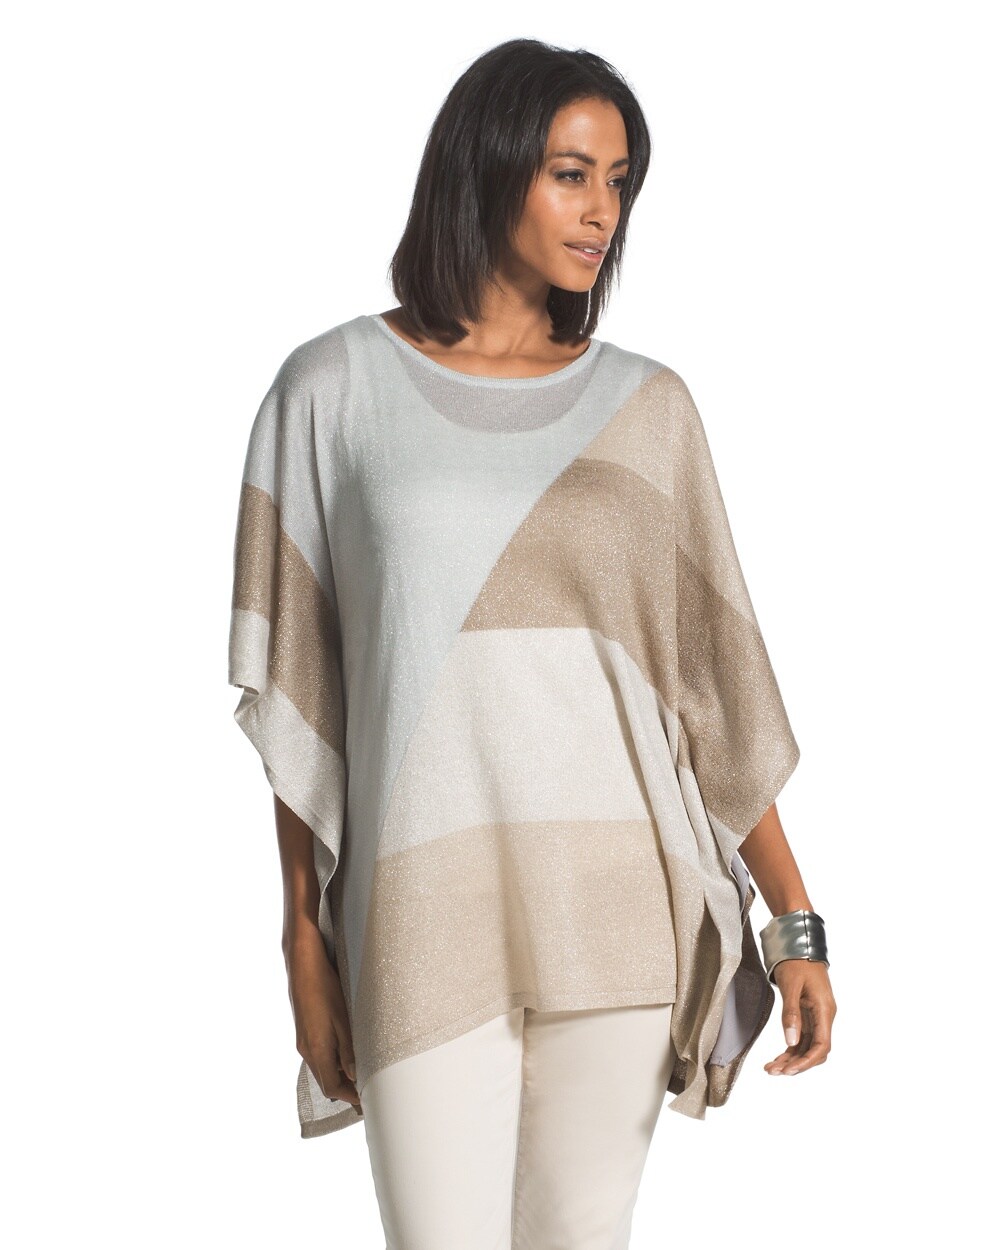 Shimmer Shayla Colorblock Poncho